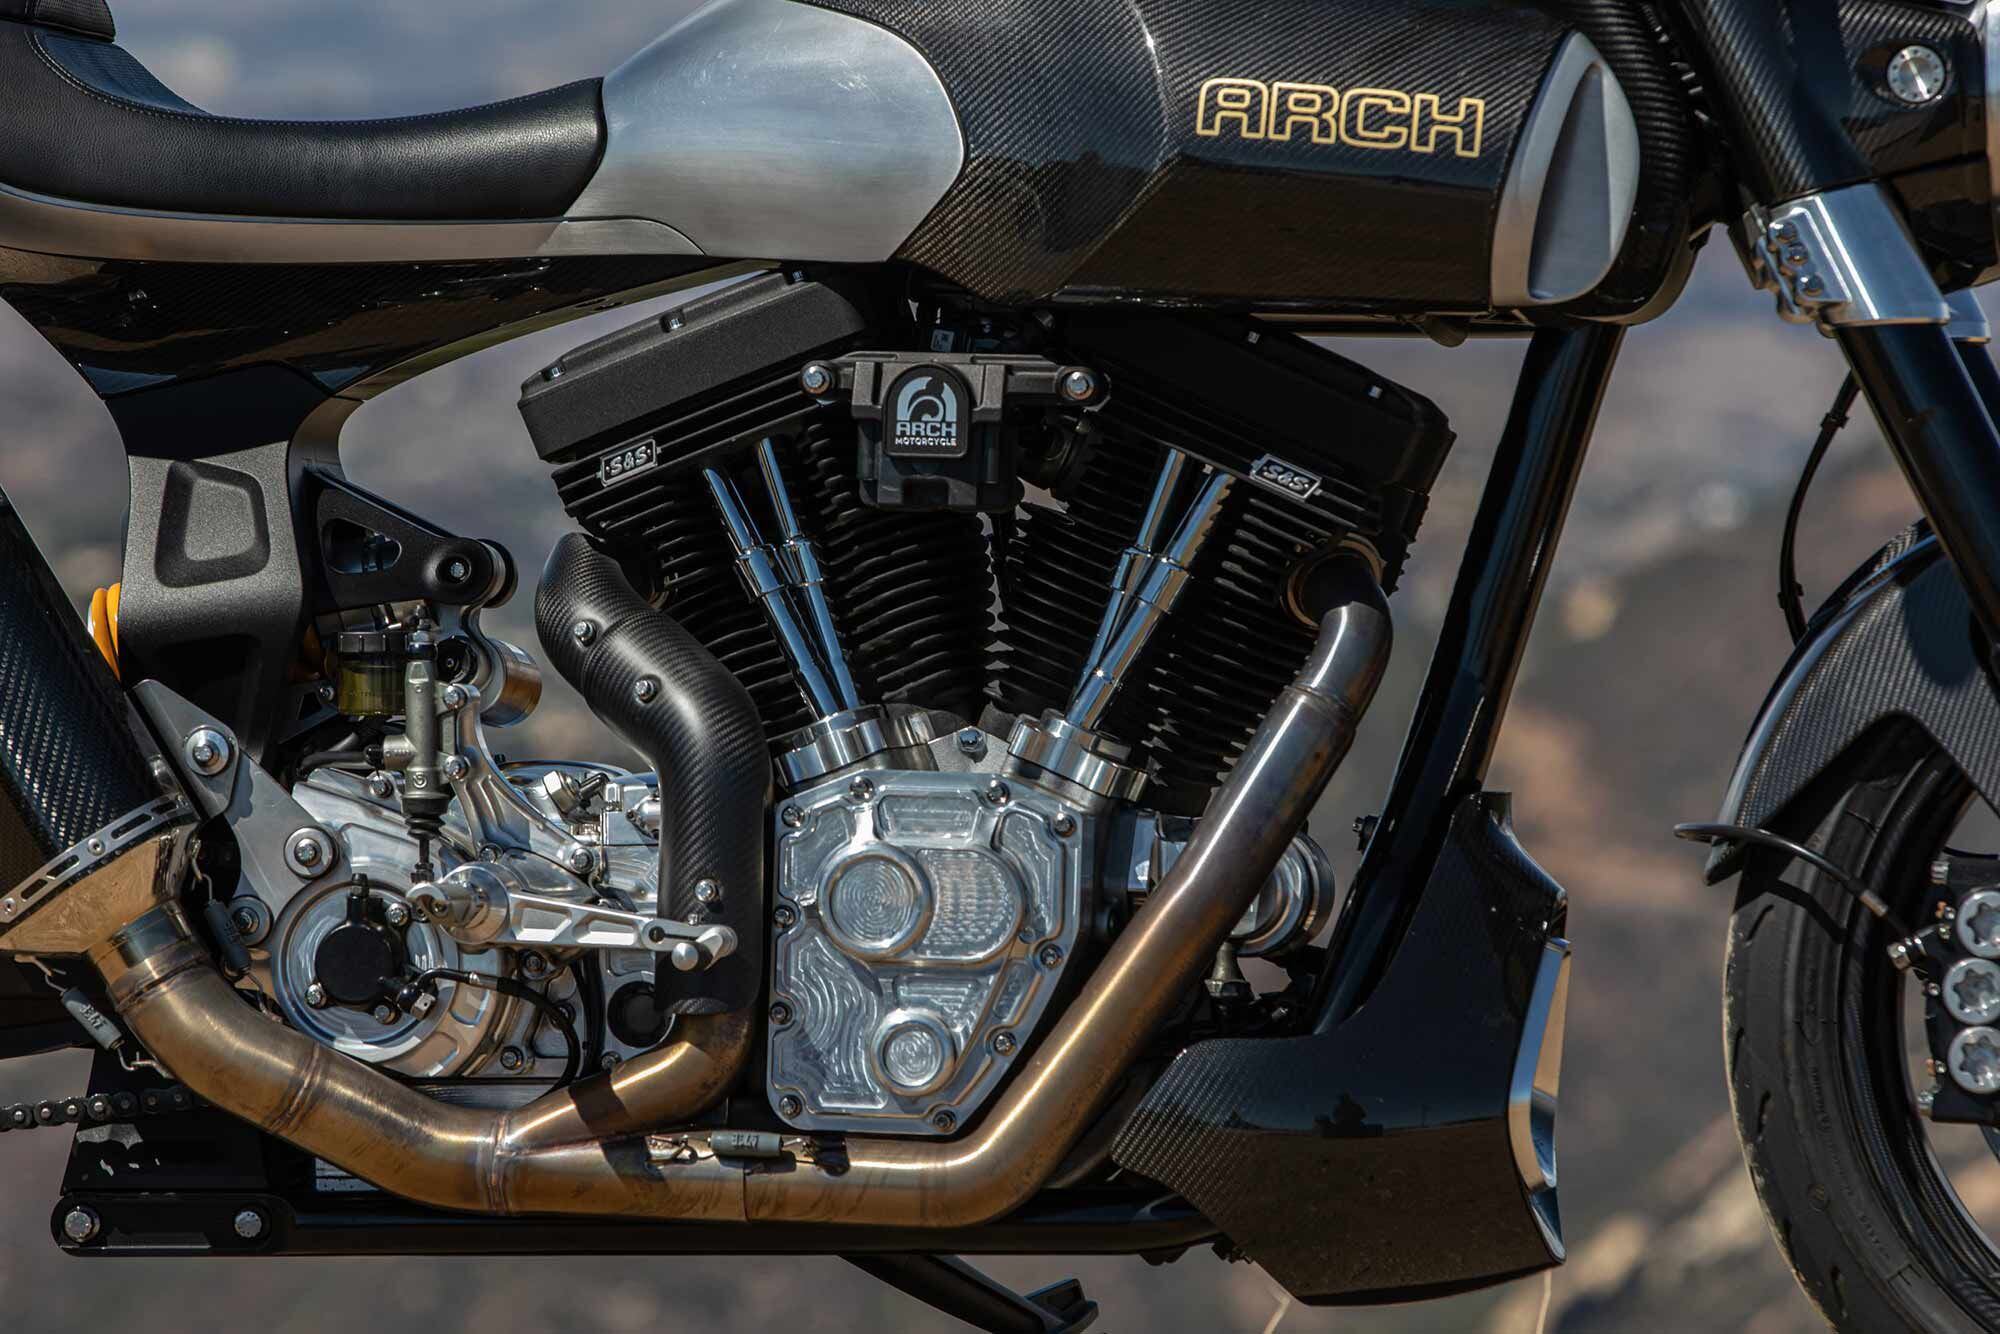 The 1s carries over the Arch-designed 2,032cc S&S engine unchanged from the KRGT-1 spec, from what we can glean.